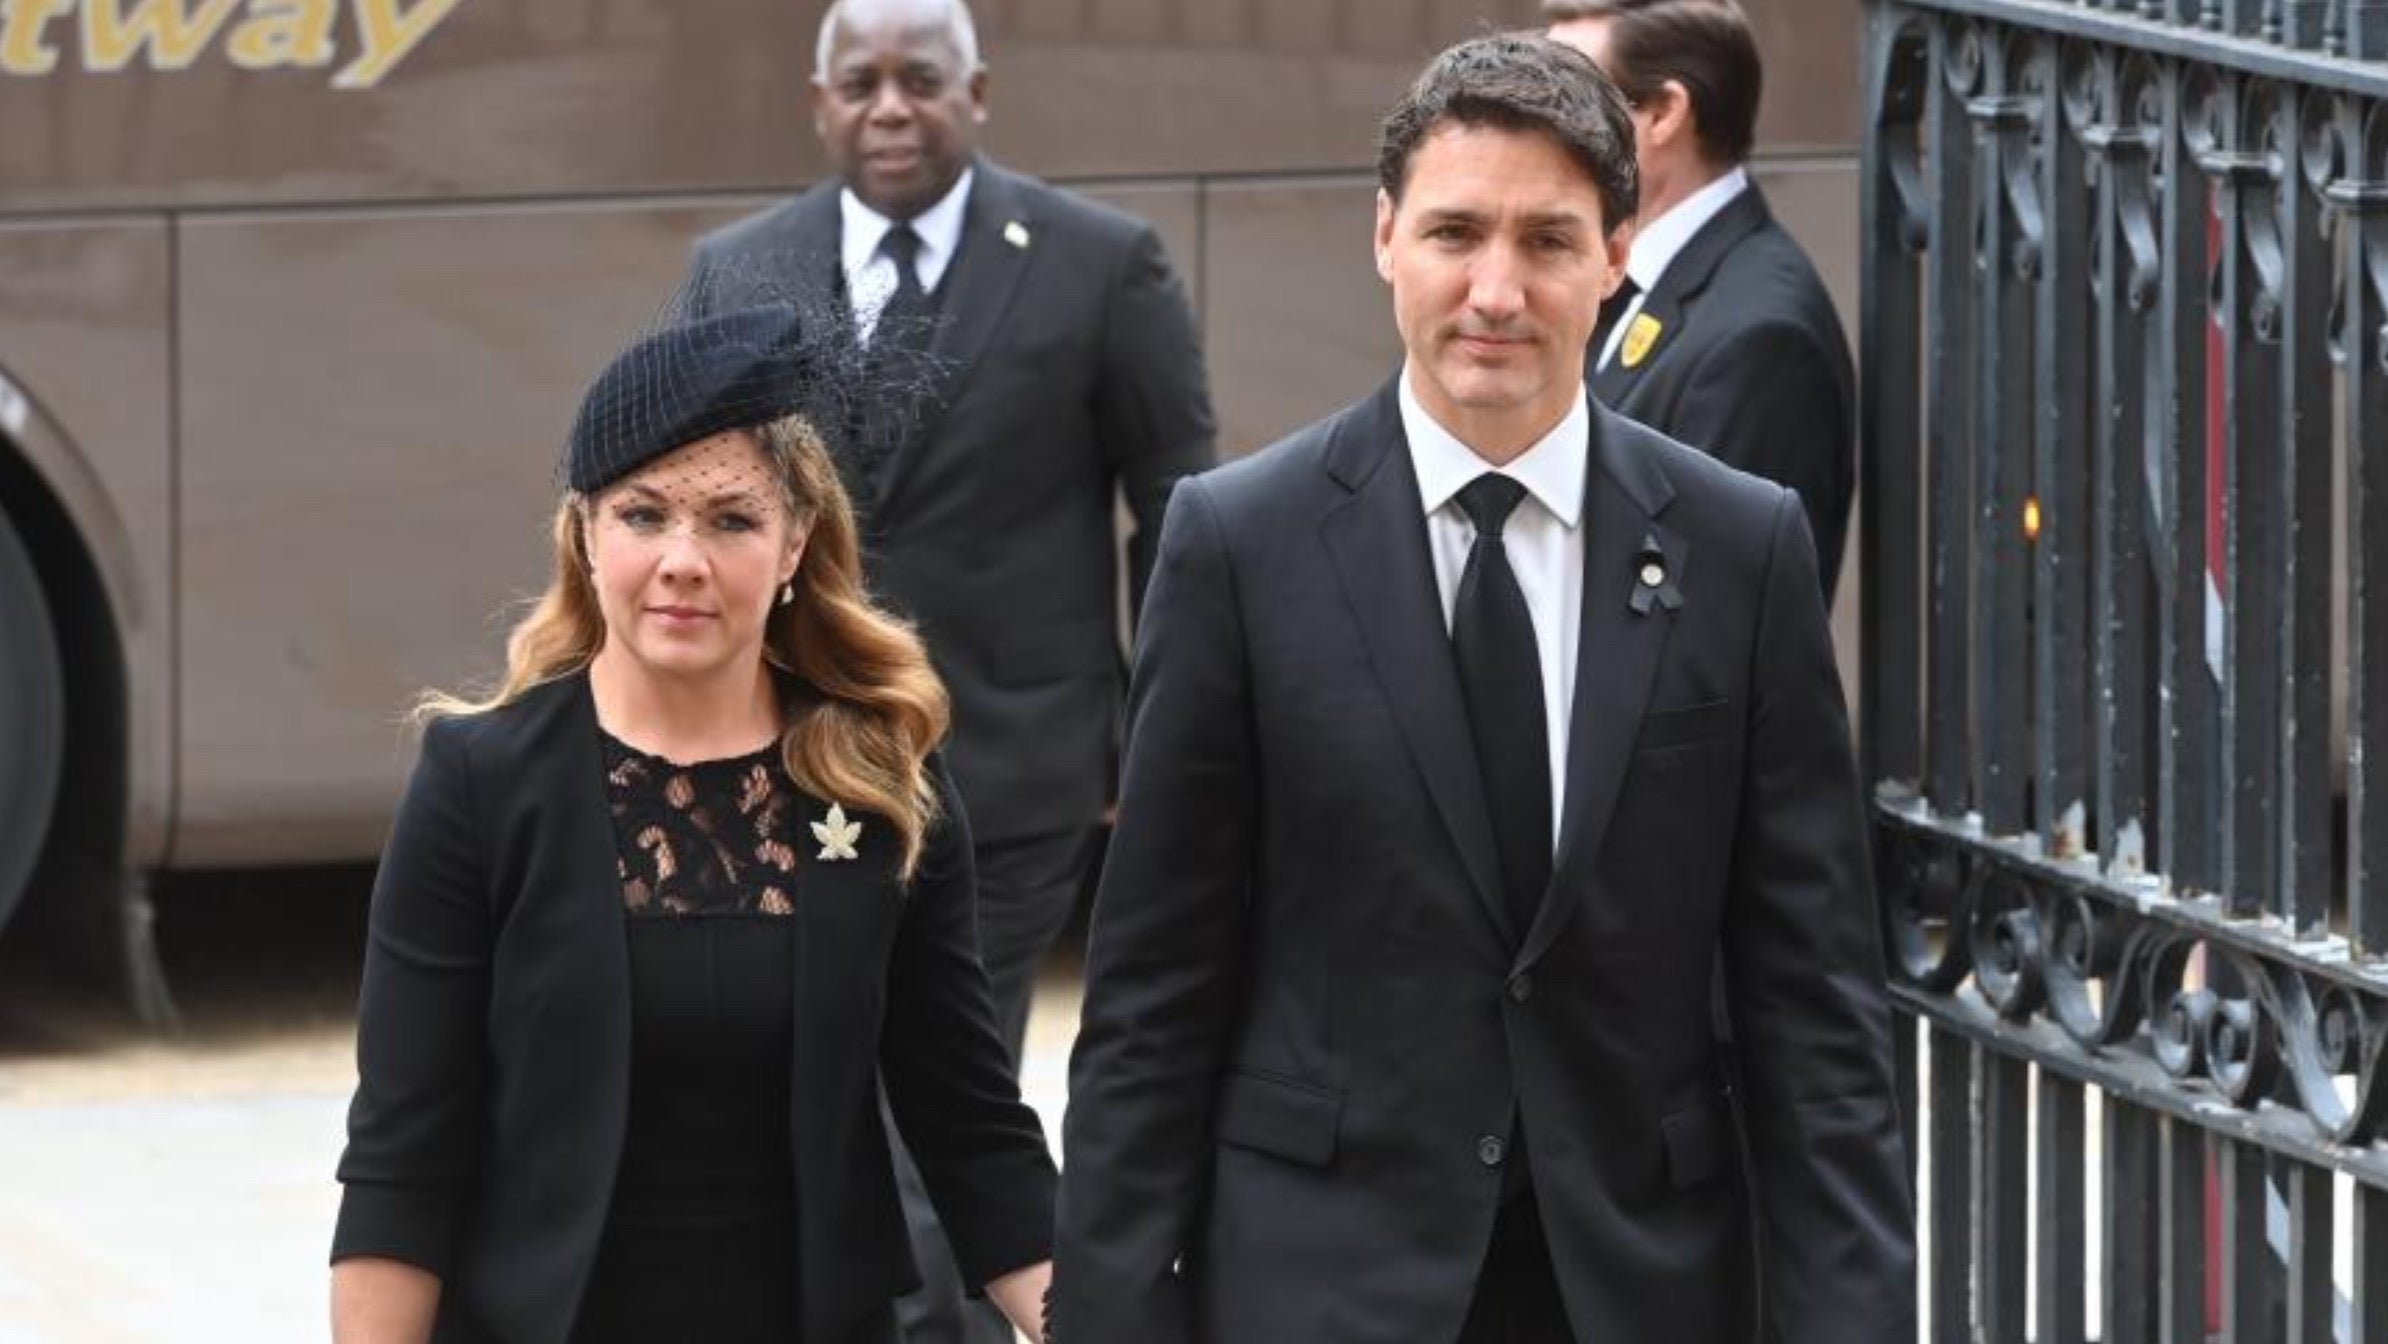 After 18 years of marriage, Canadian Prime Minister Justin Trudeau announces separation from his wife, Magnate Daily